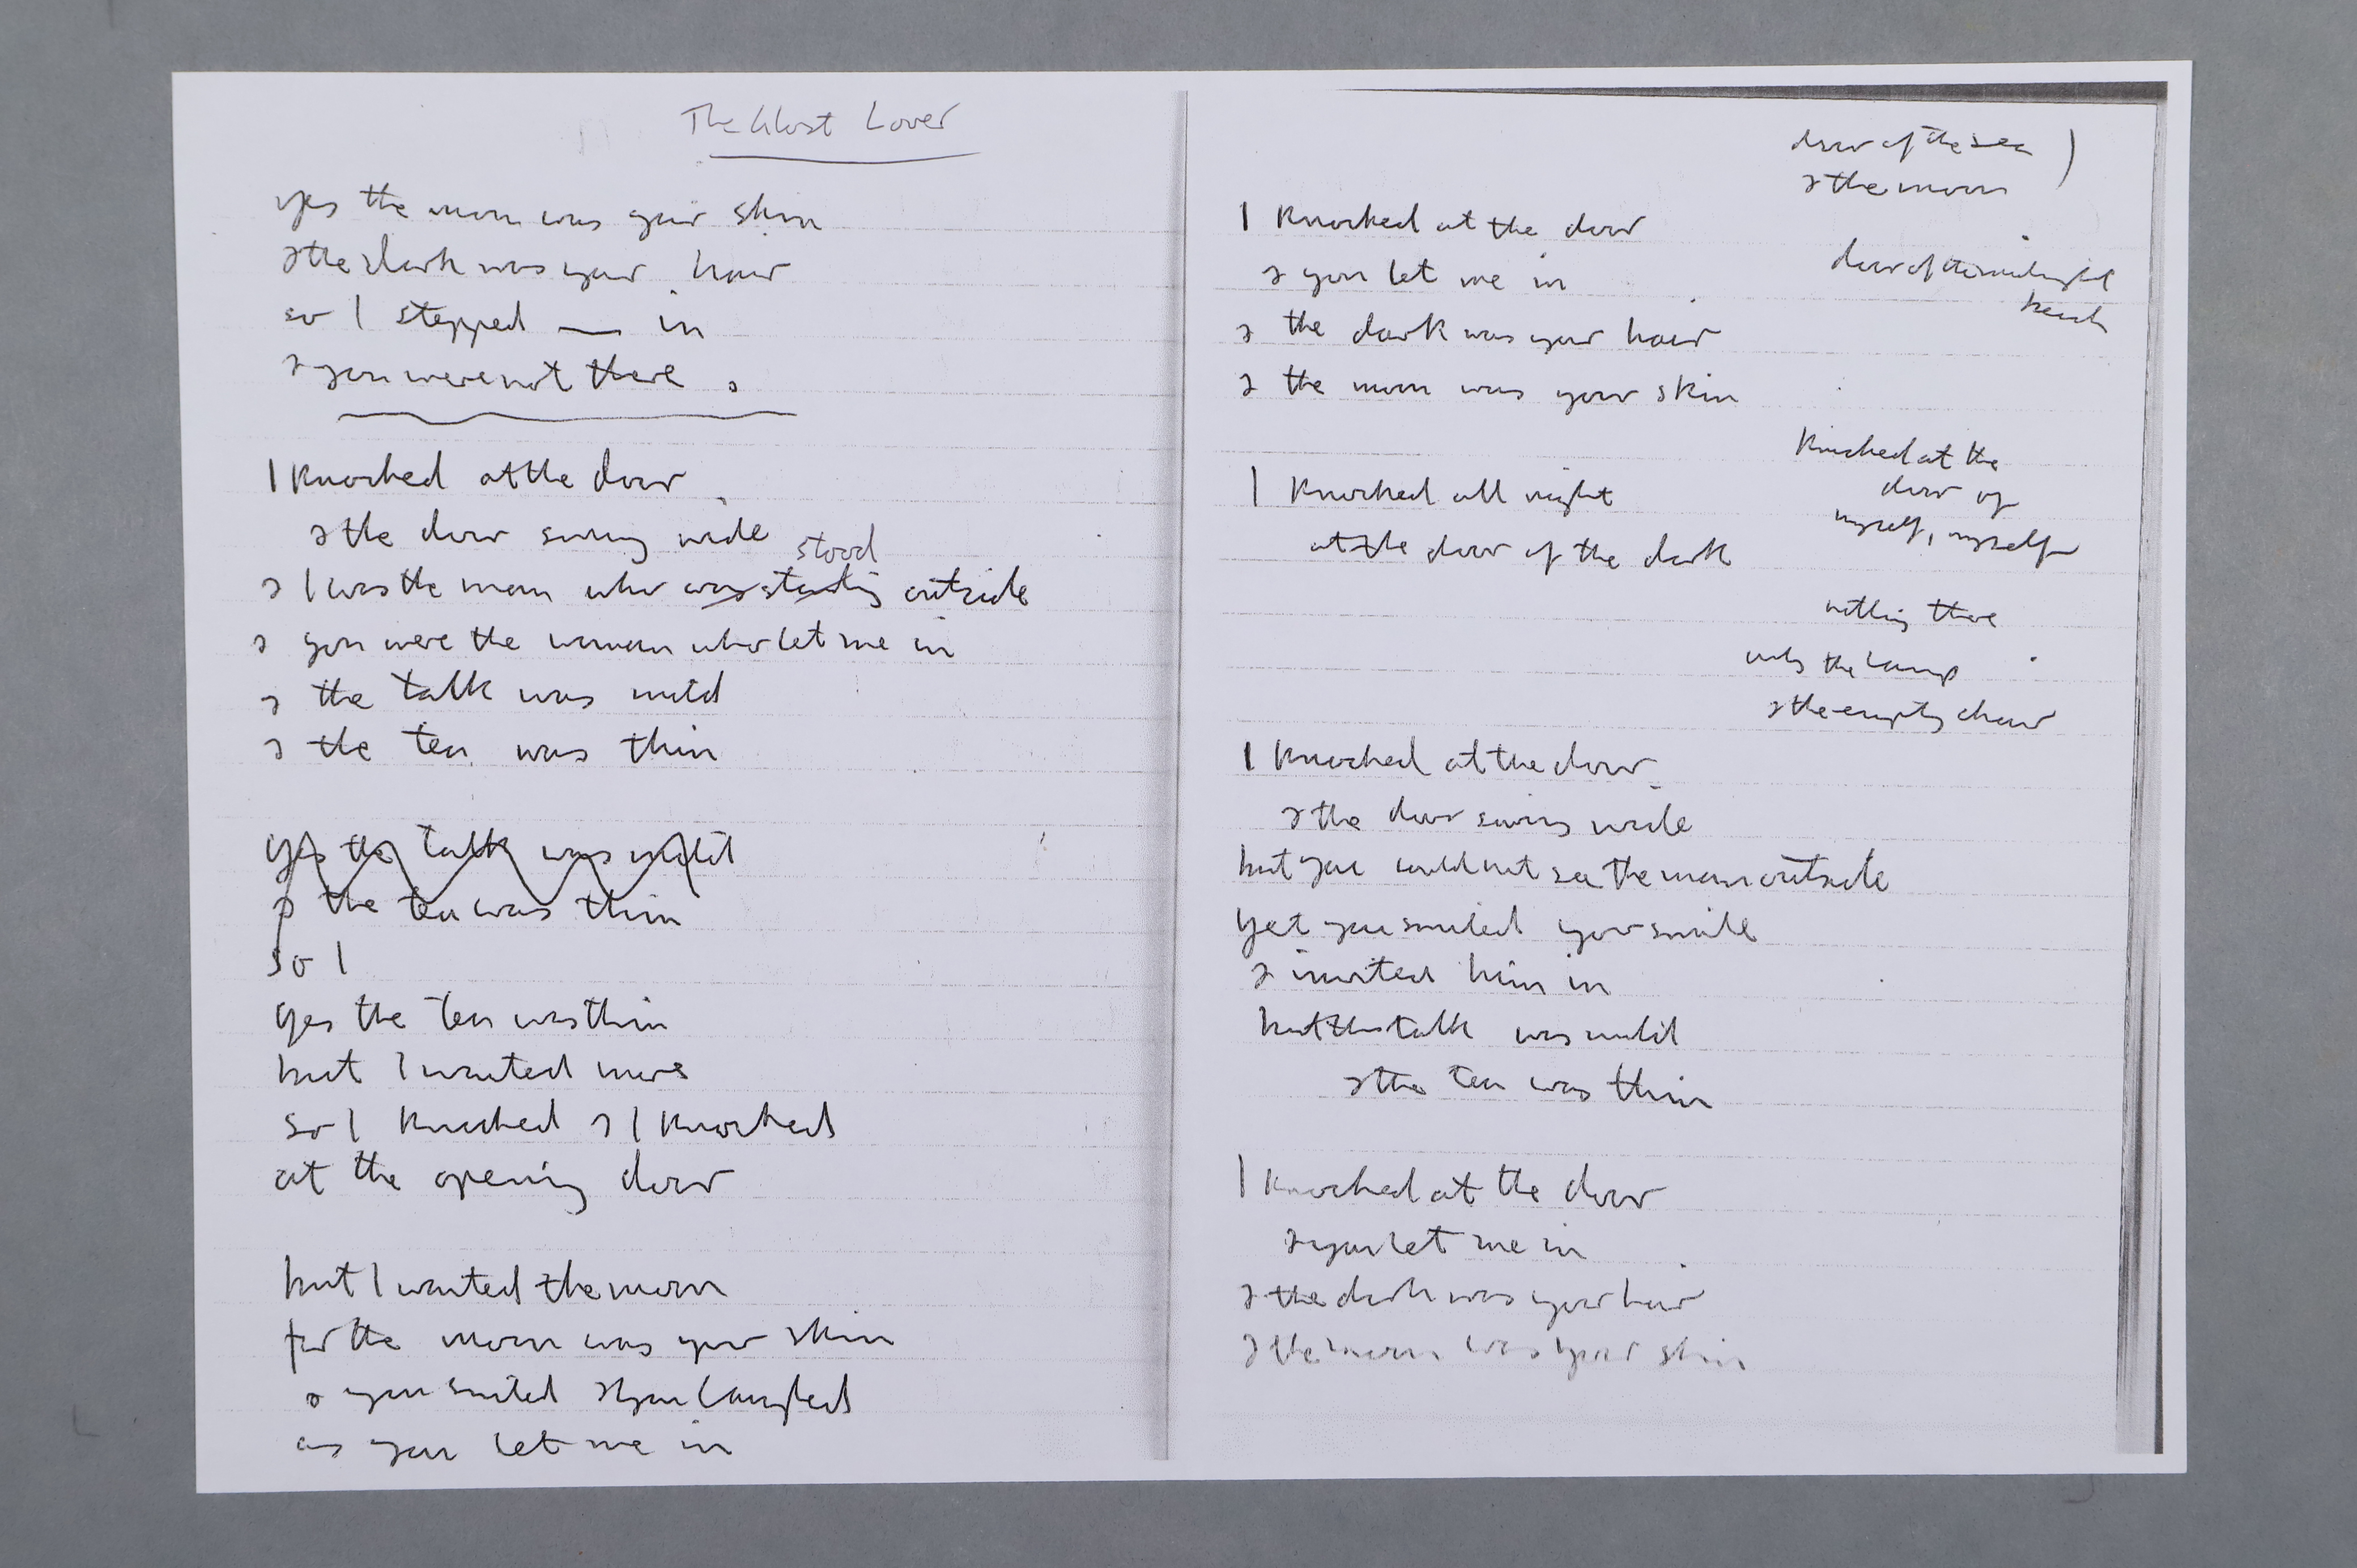 A photocopy of a manuscript poem draft in a notebook.